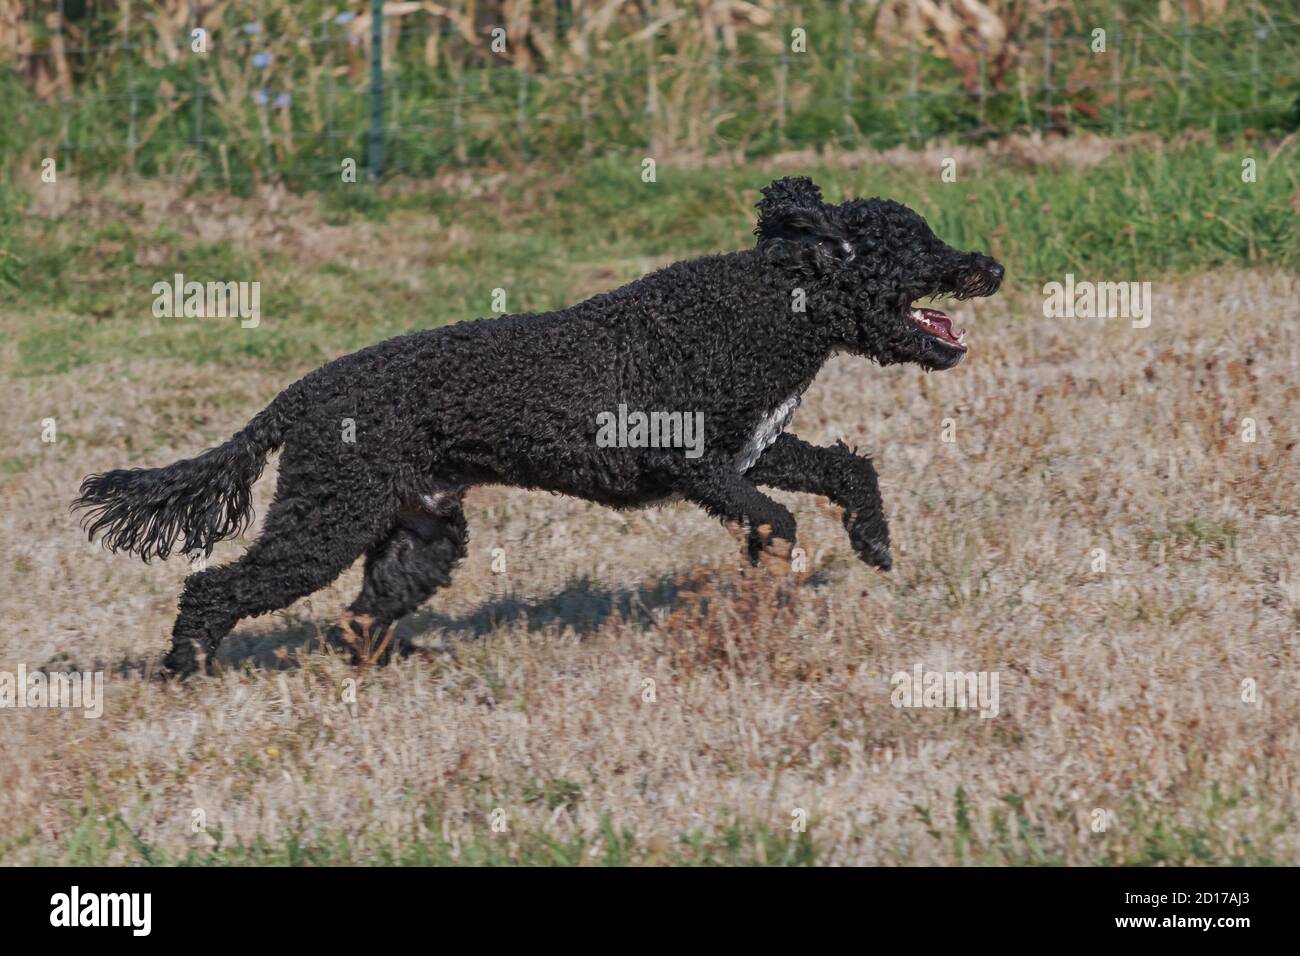 a young black portuguese water dog running joyfully in a pasture groomed in a puppy cut on a blurred background Stock Photo